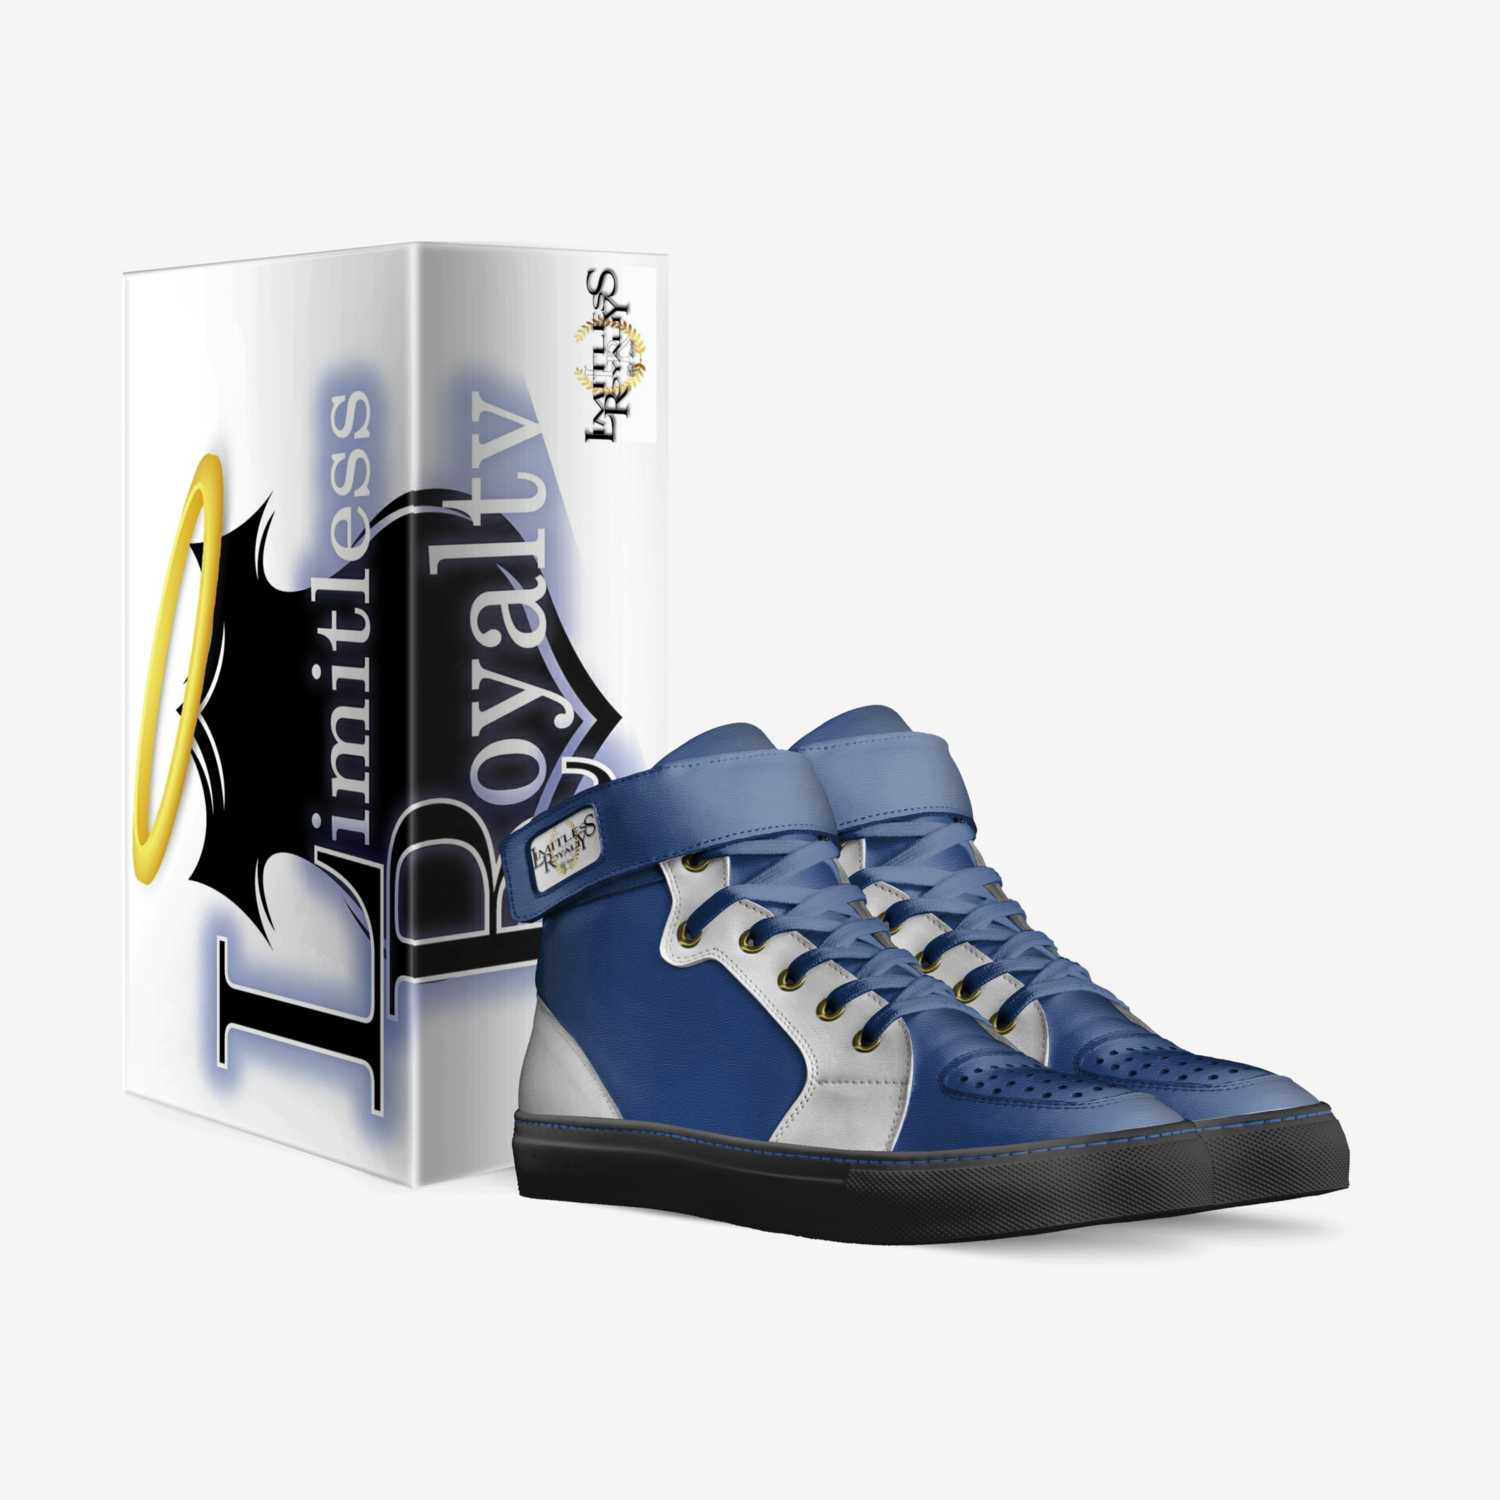 TrueBlu custom made in Italy shoes by Limitlessroyalty Brand | Box view